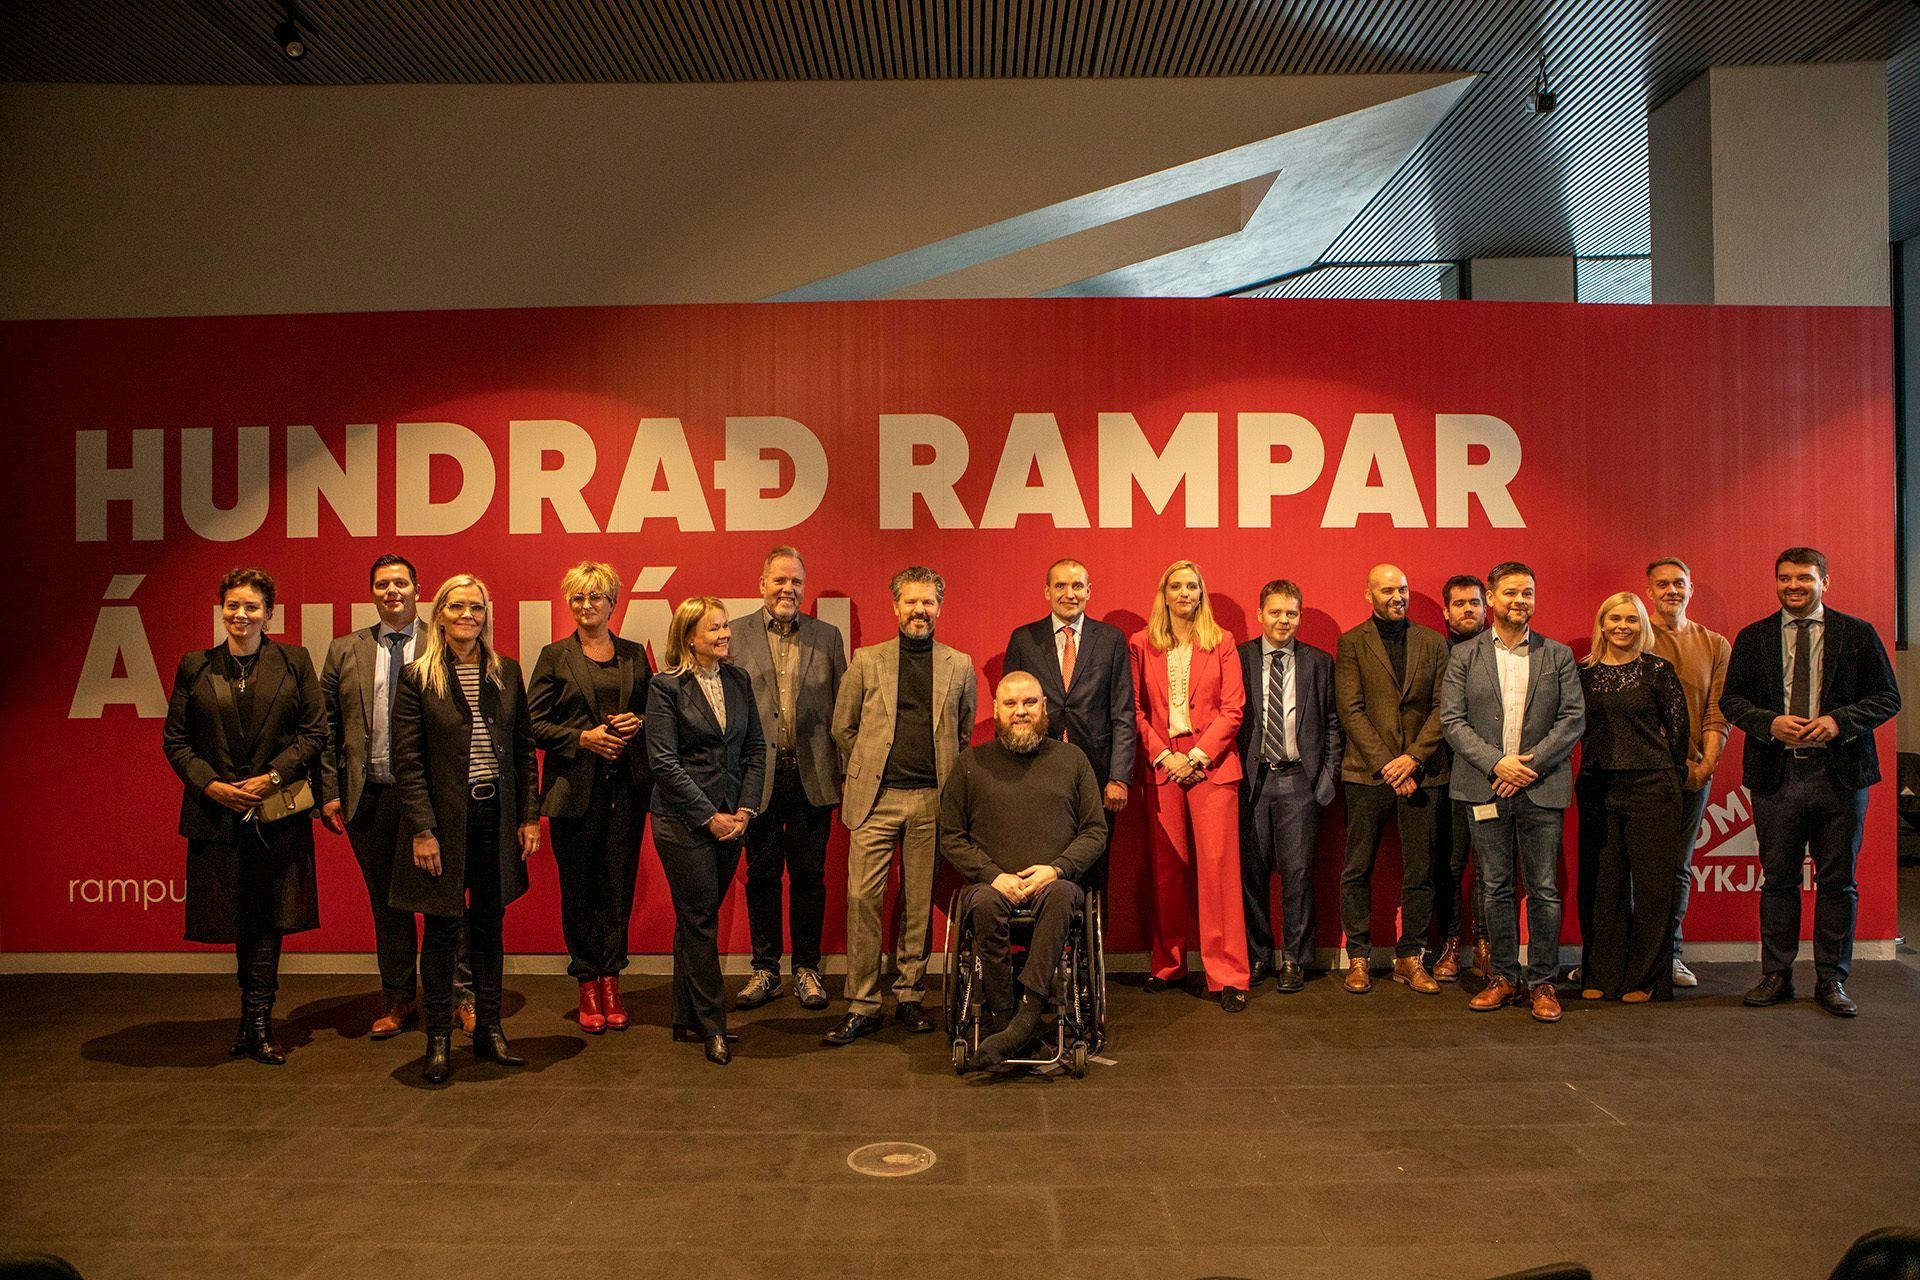 A group of people standing together in front of a red banner that reads "HUNDRAD RAMPAR"